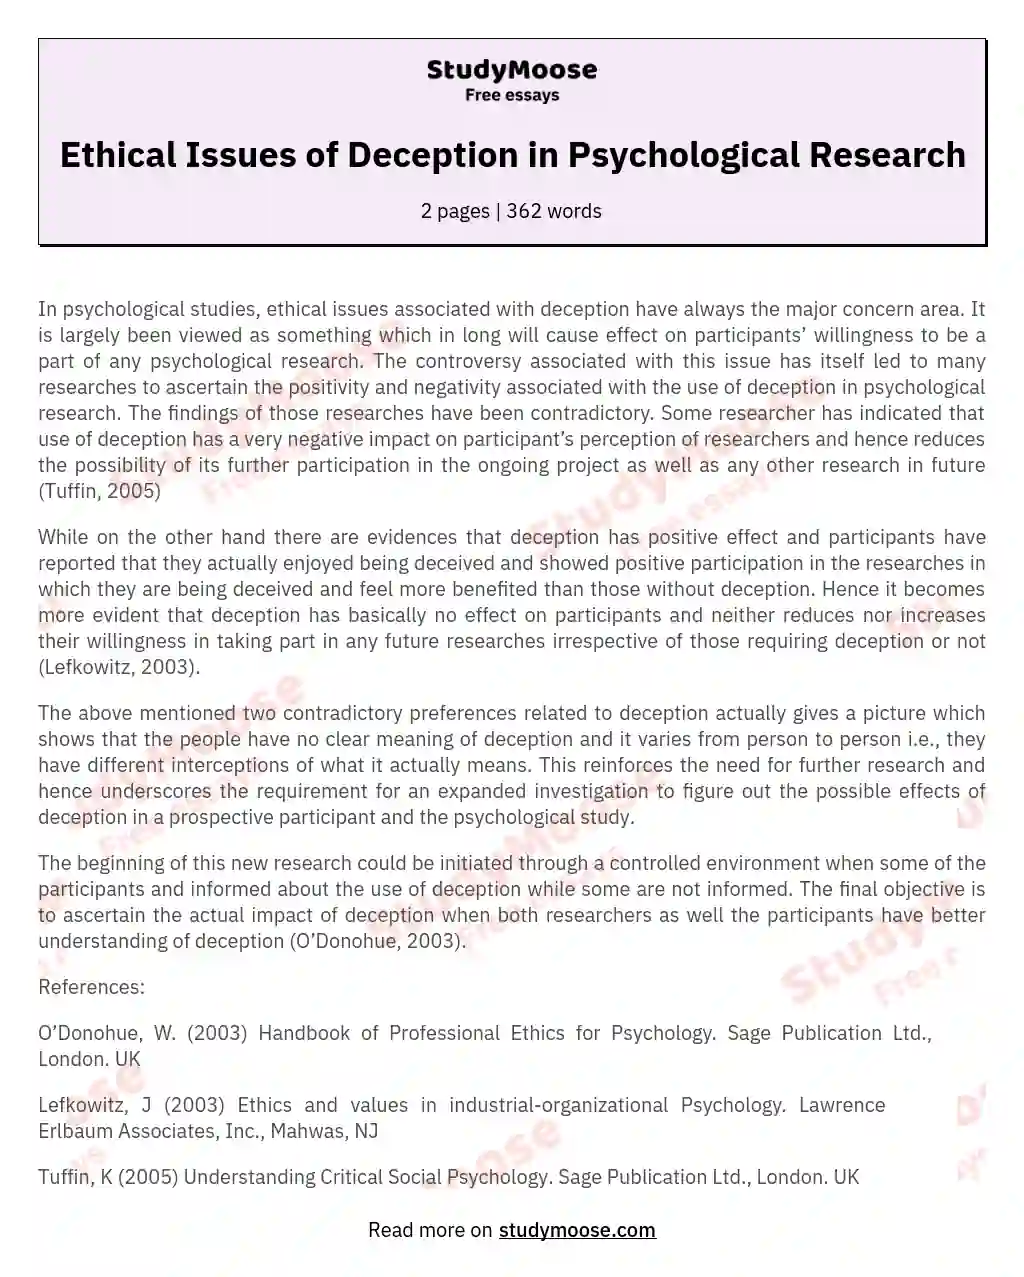 Ethical Issues of Deception in Psychological Research essay